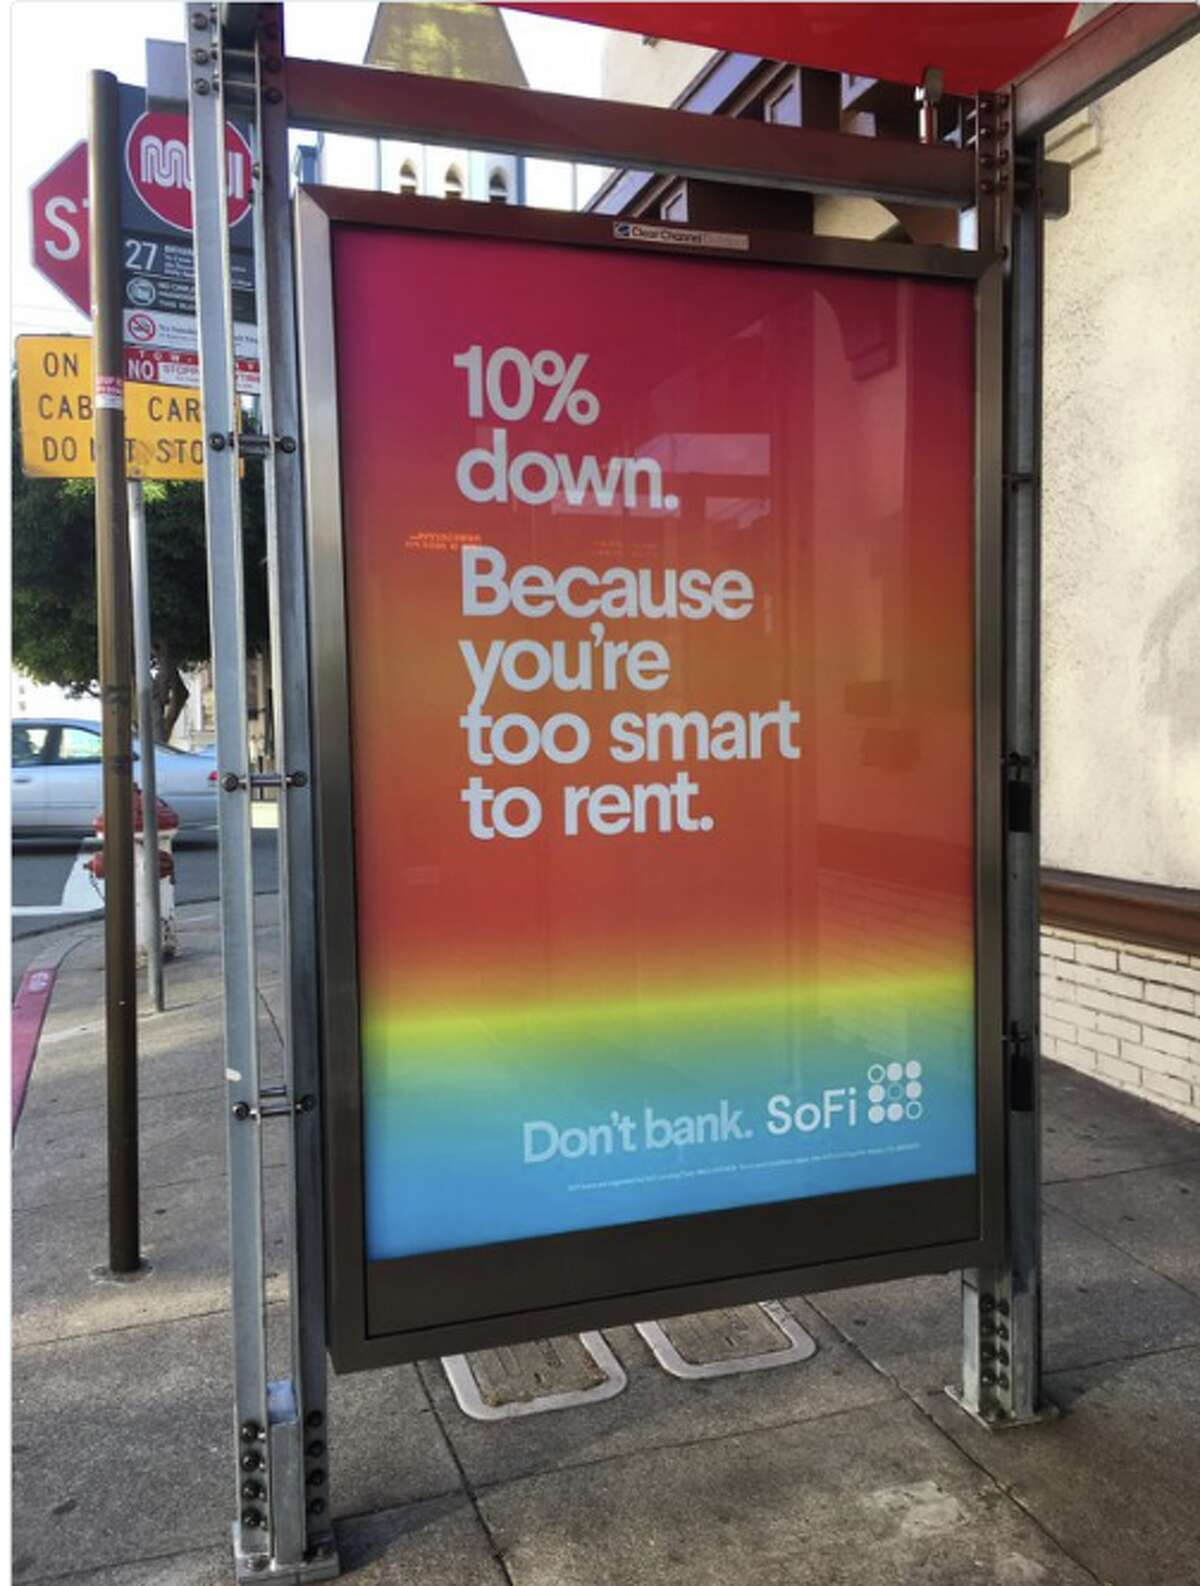 'Tone-deaf' ad insults those who rent, enrages some in San ...